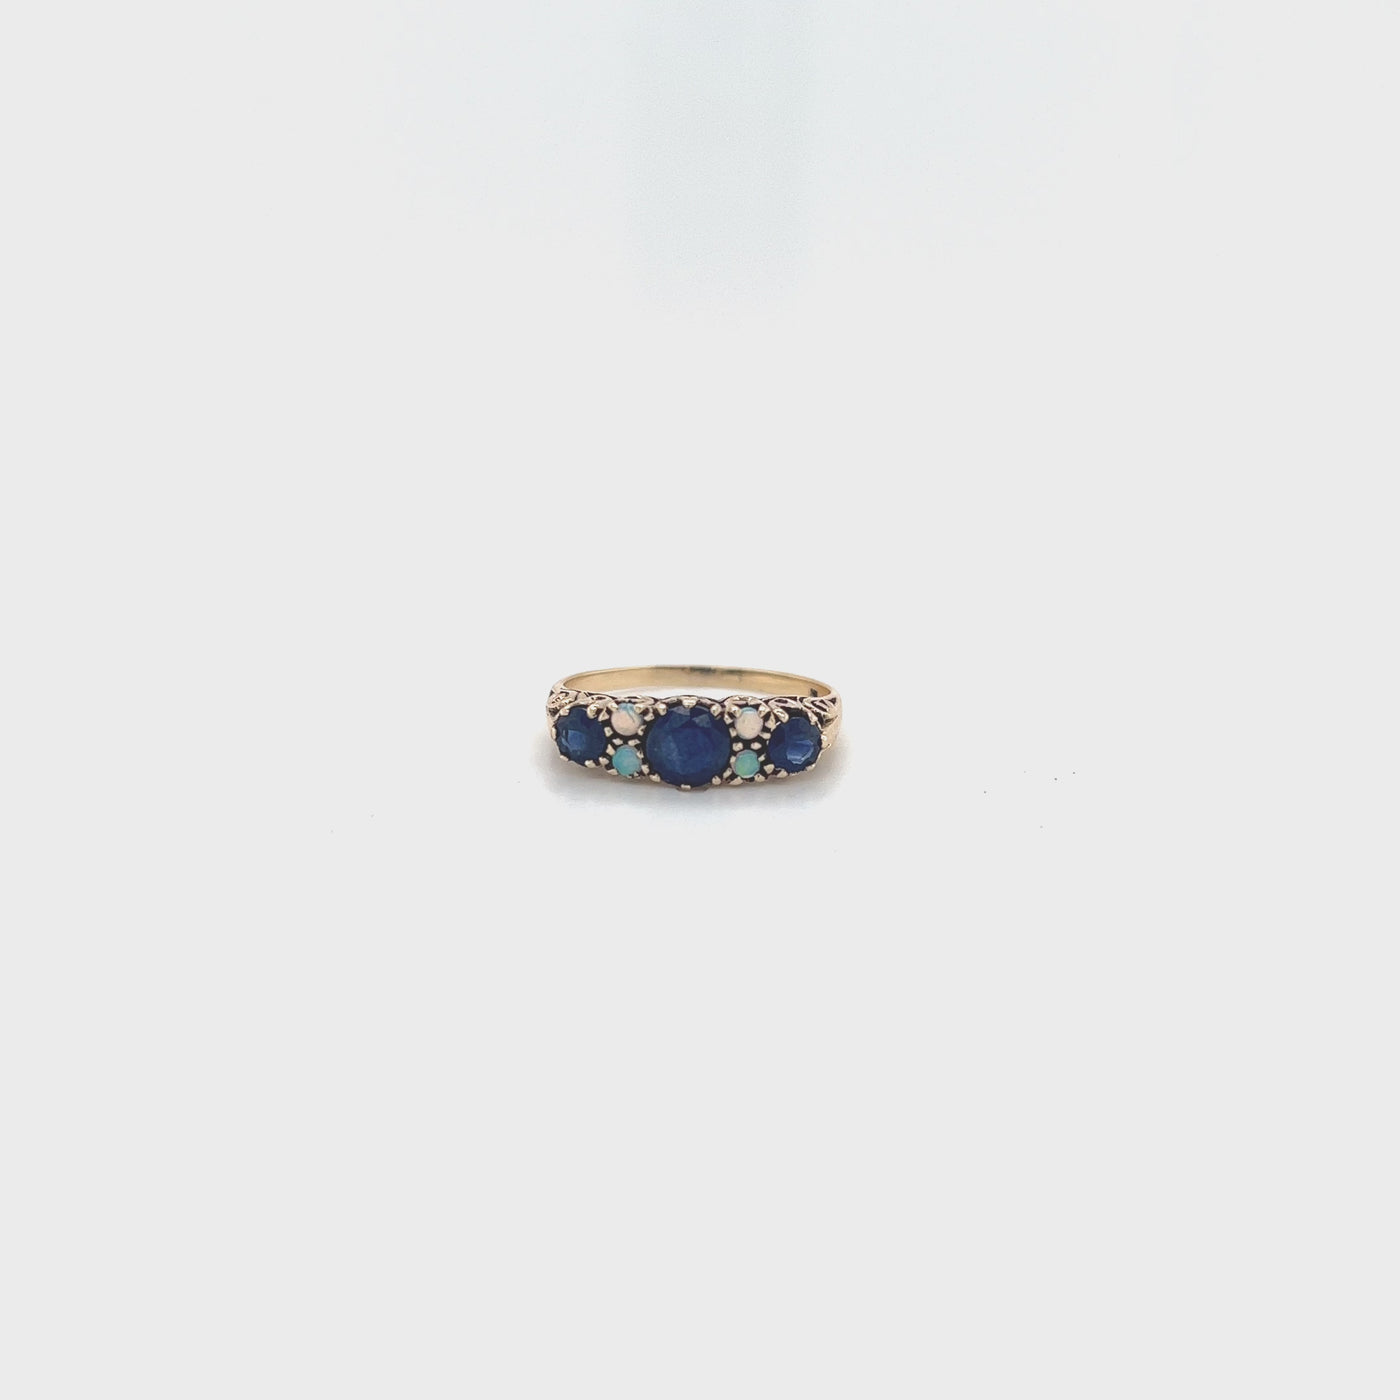 9 carat yellow gold ring with sapphires and opal